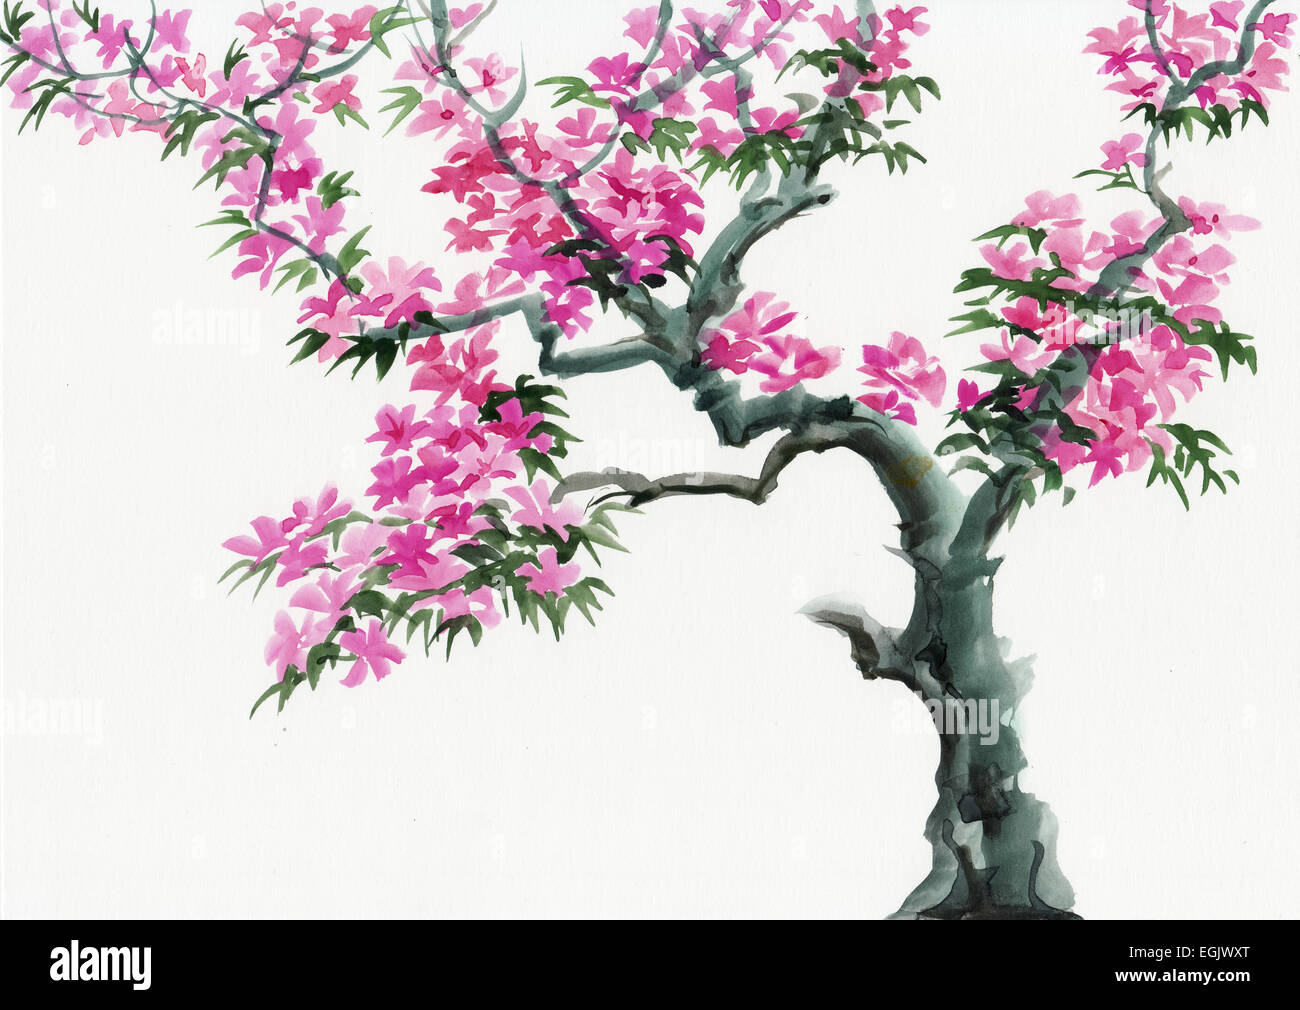 Tree in blossom with pink flowers watercolor painting. Asian style. Stock Photo